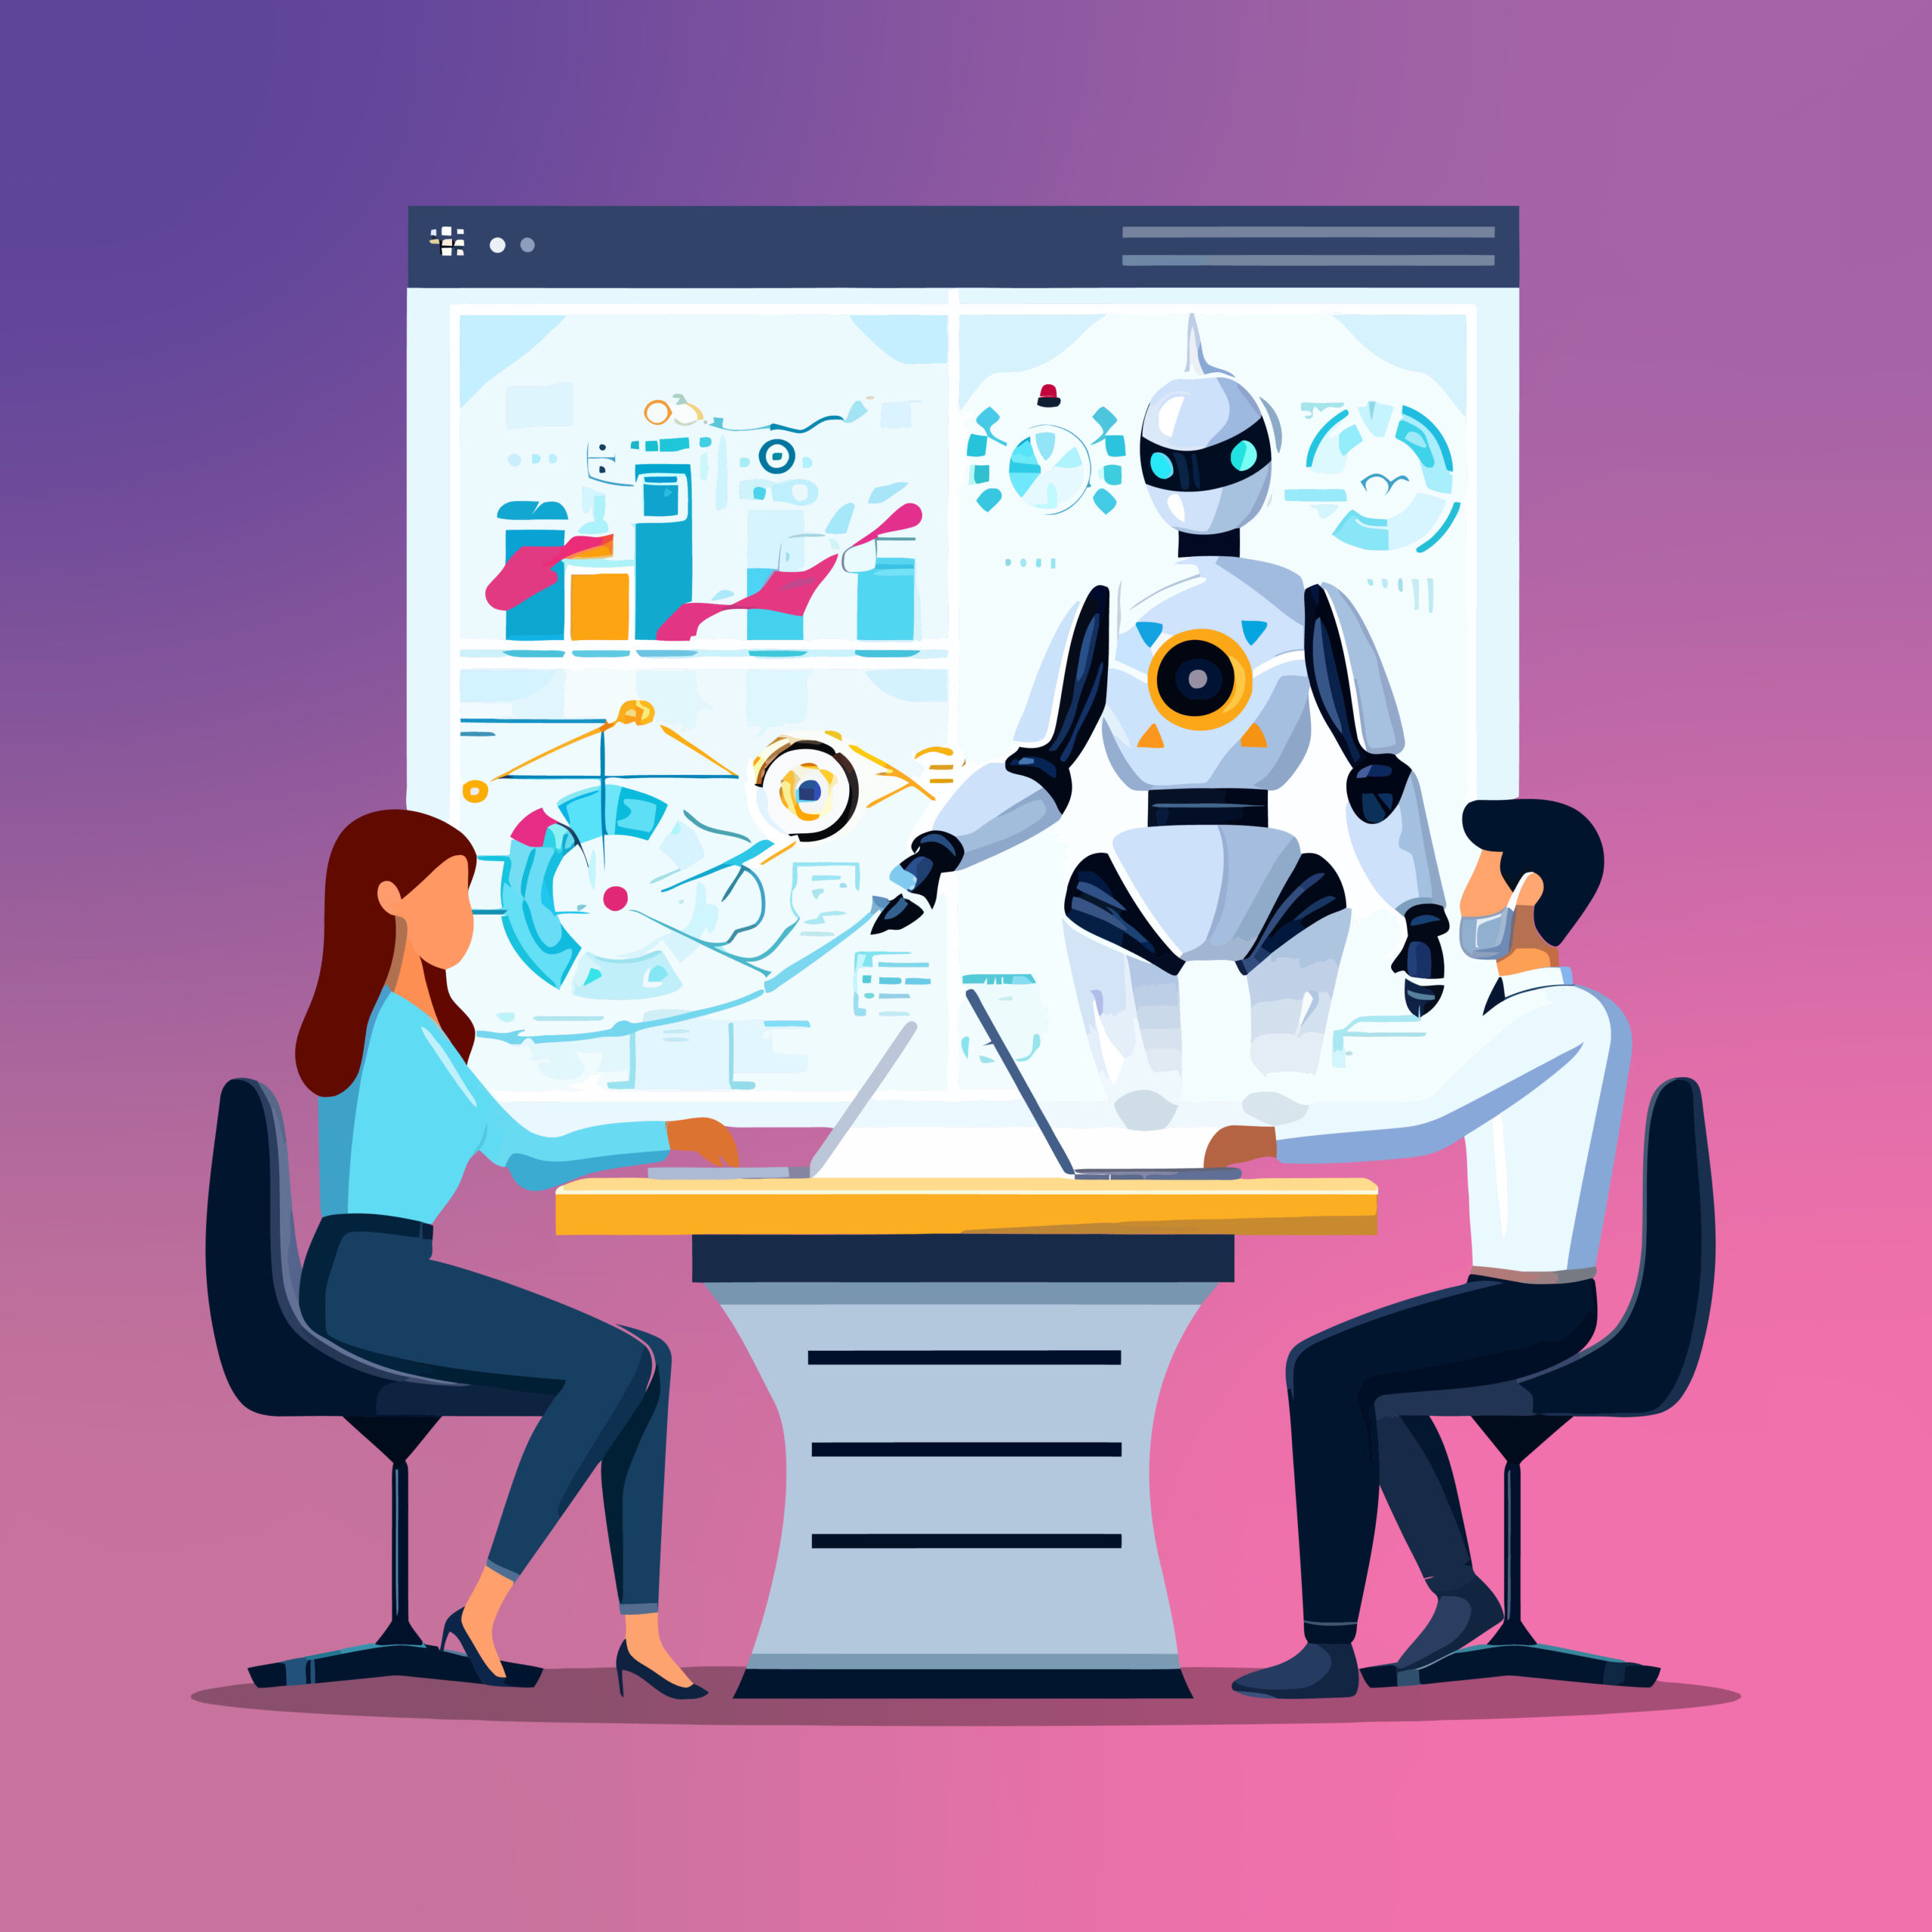 featured image of the blog titled "The Role of AI and Machine Learning in Digital Marketing"